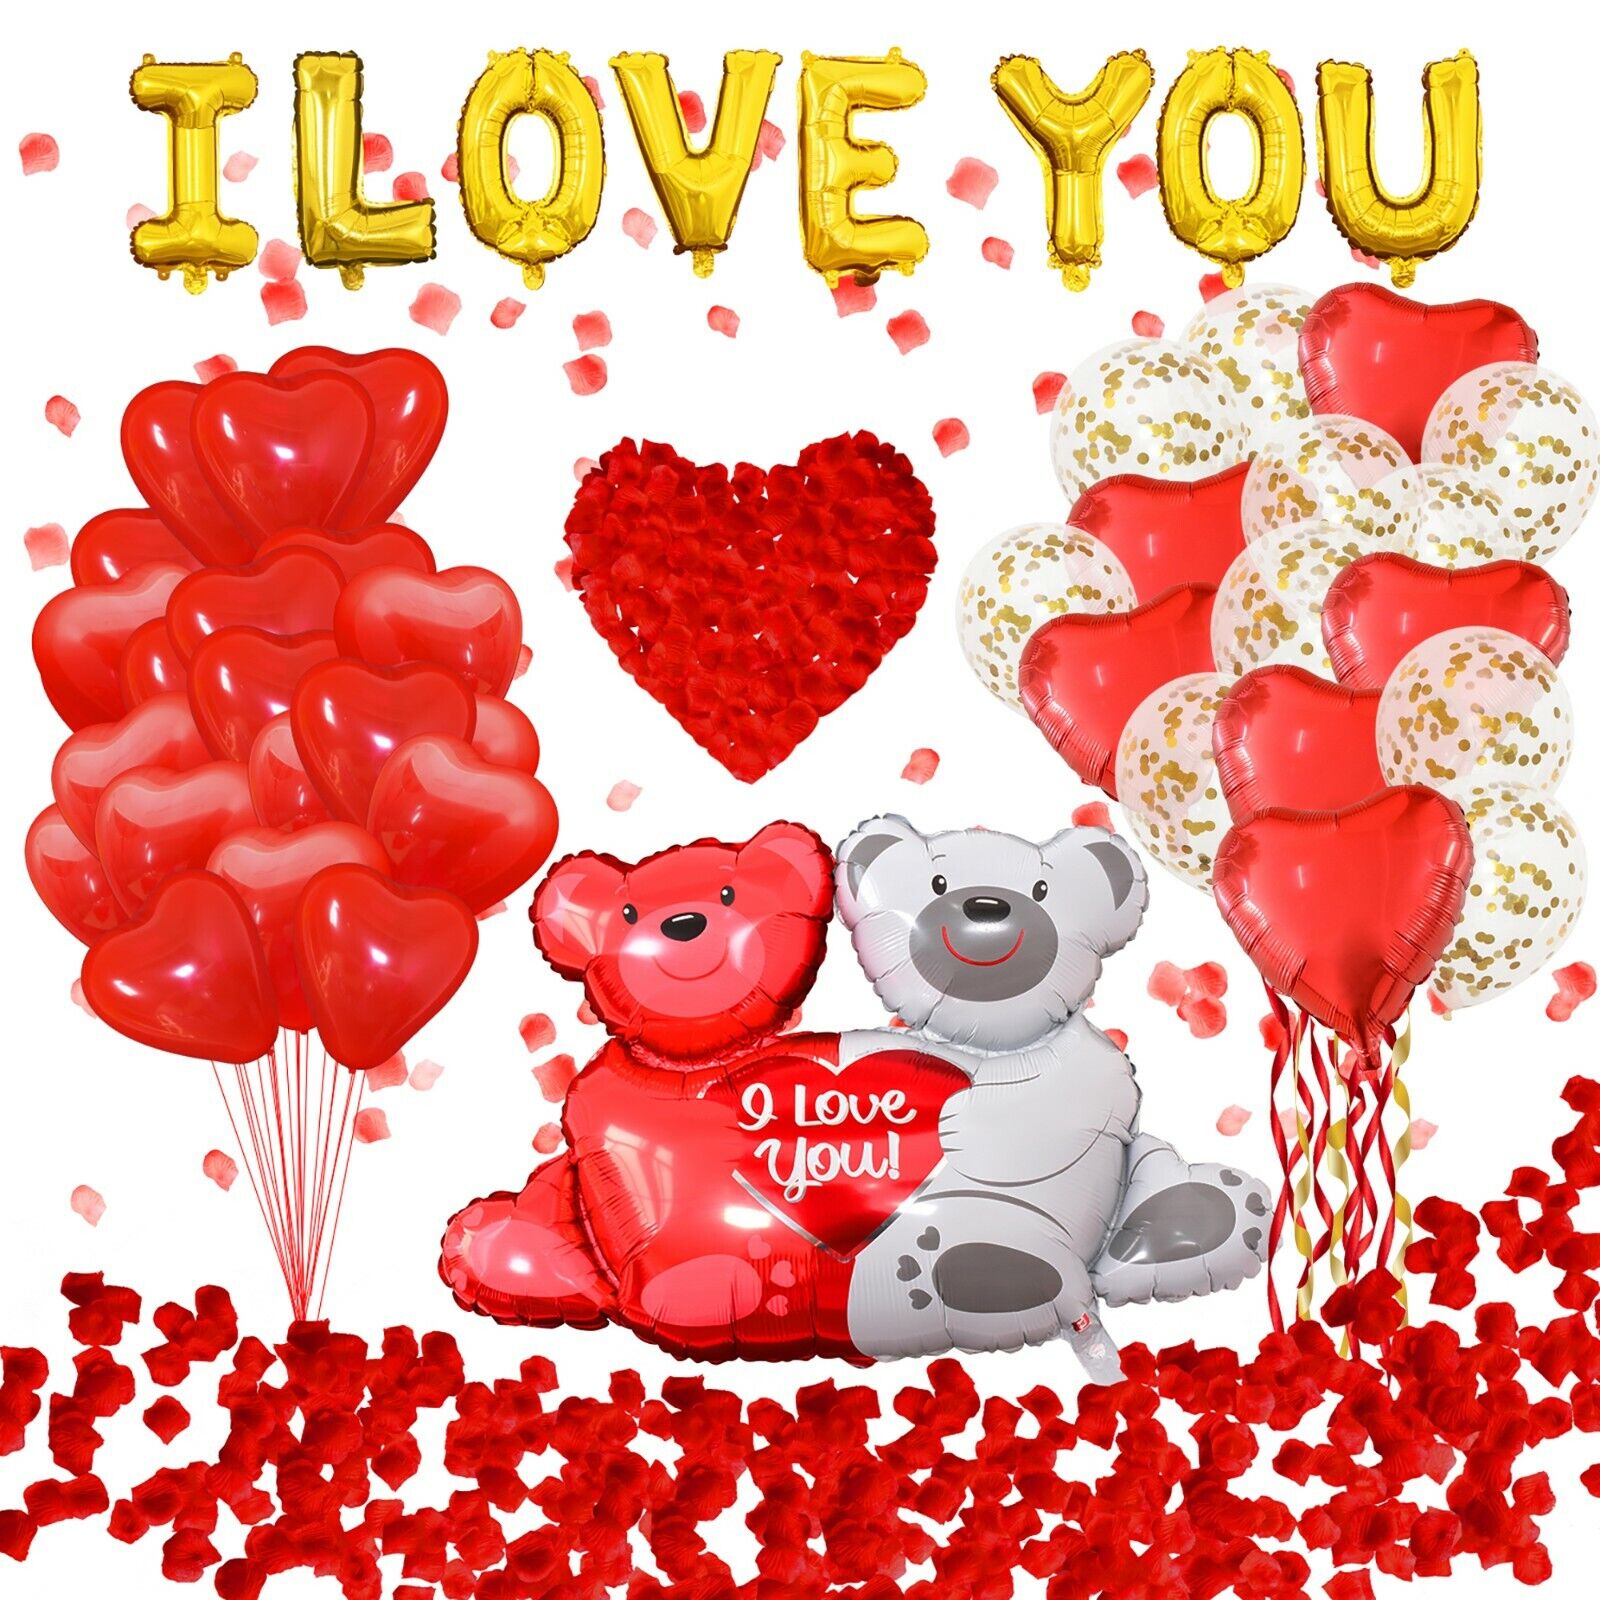 Valentines Day Balloons Decoration Set I Love You Teddy Bear Heart Shaped Party